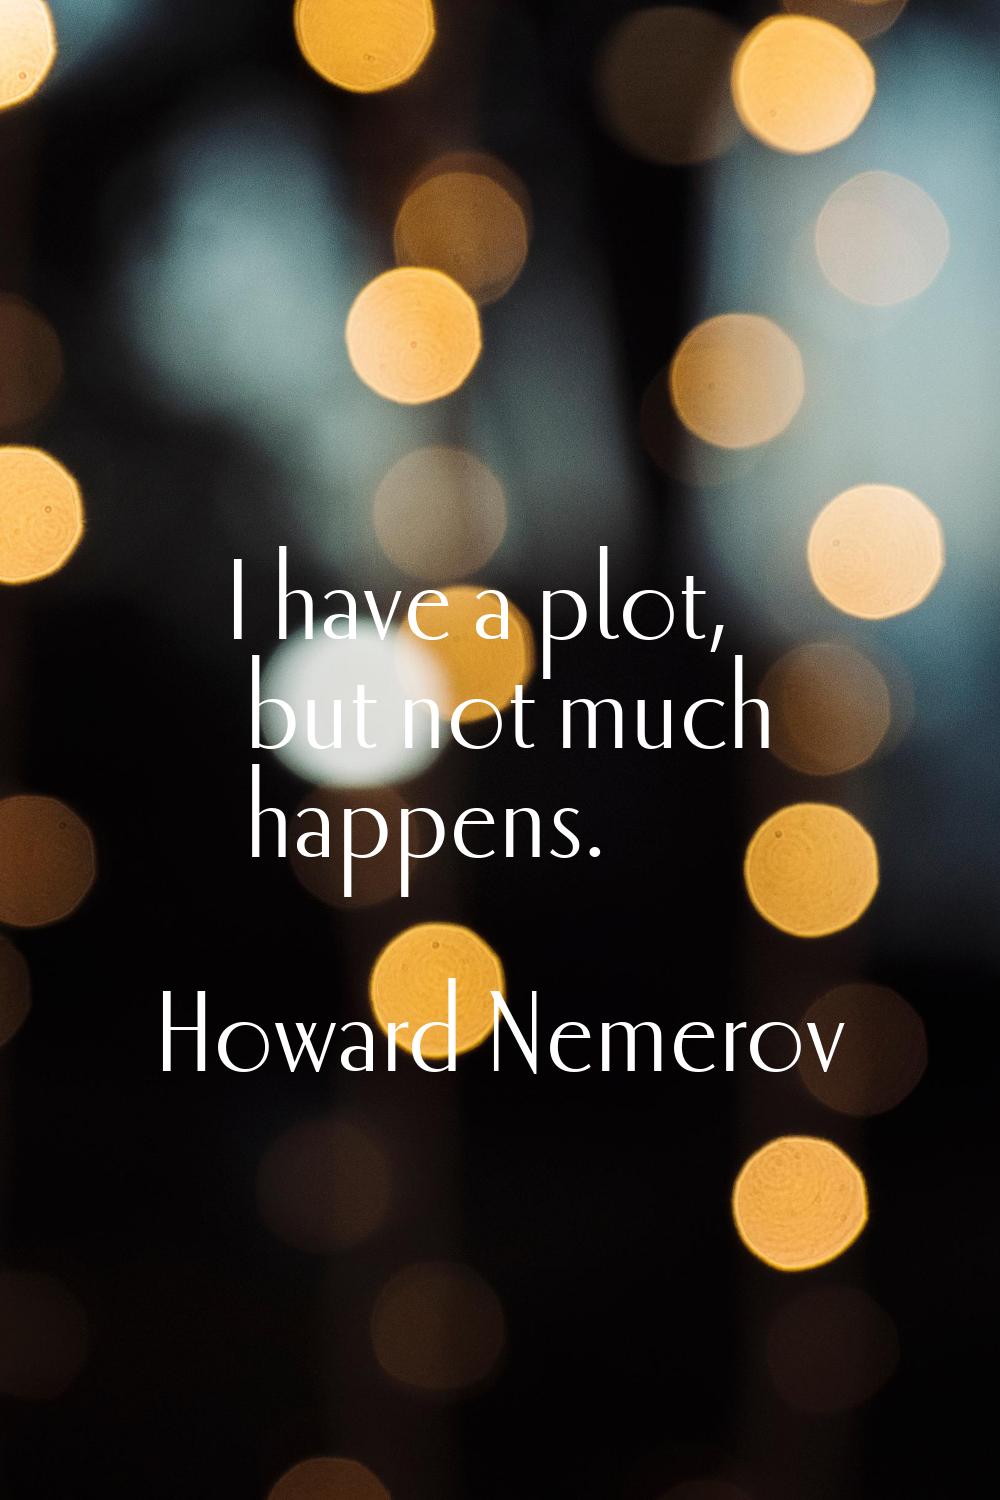 I have a plot, but not much happens.